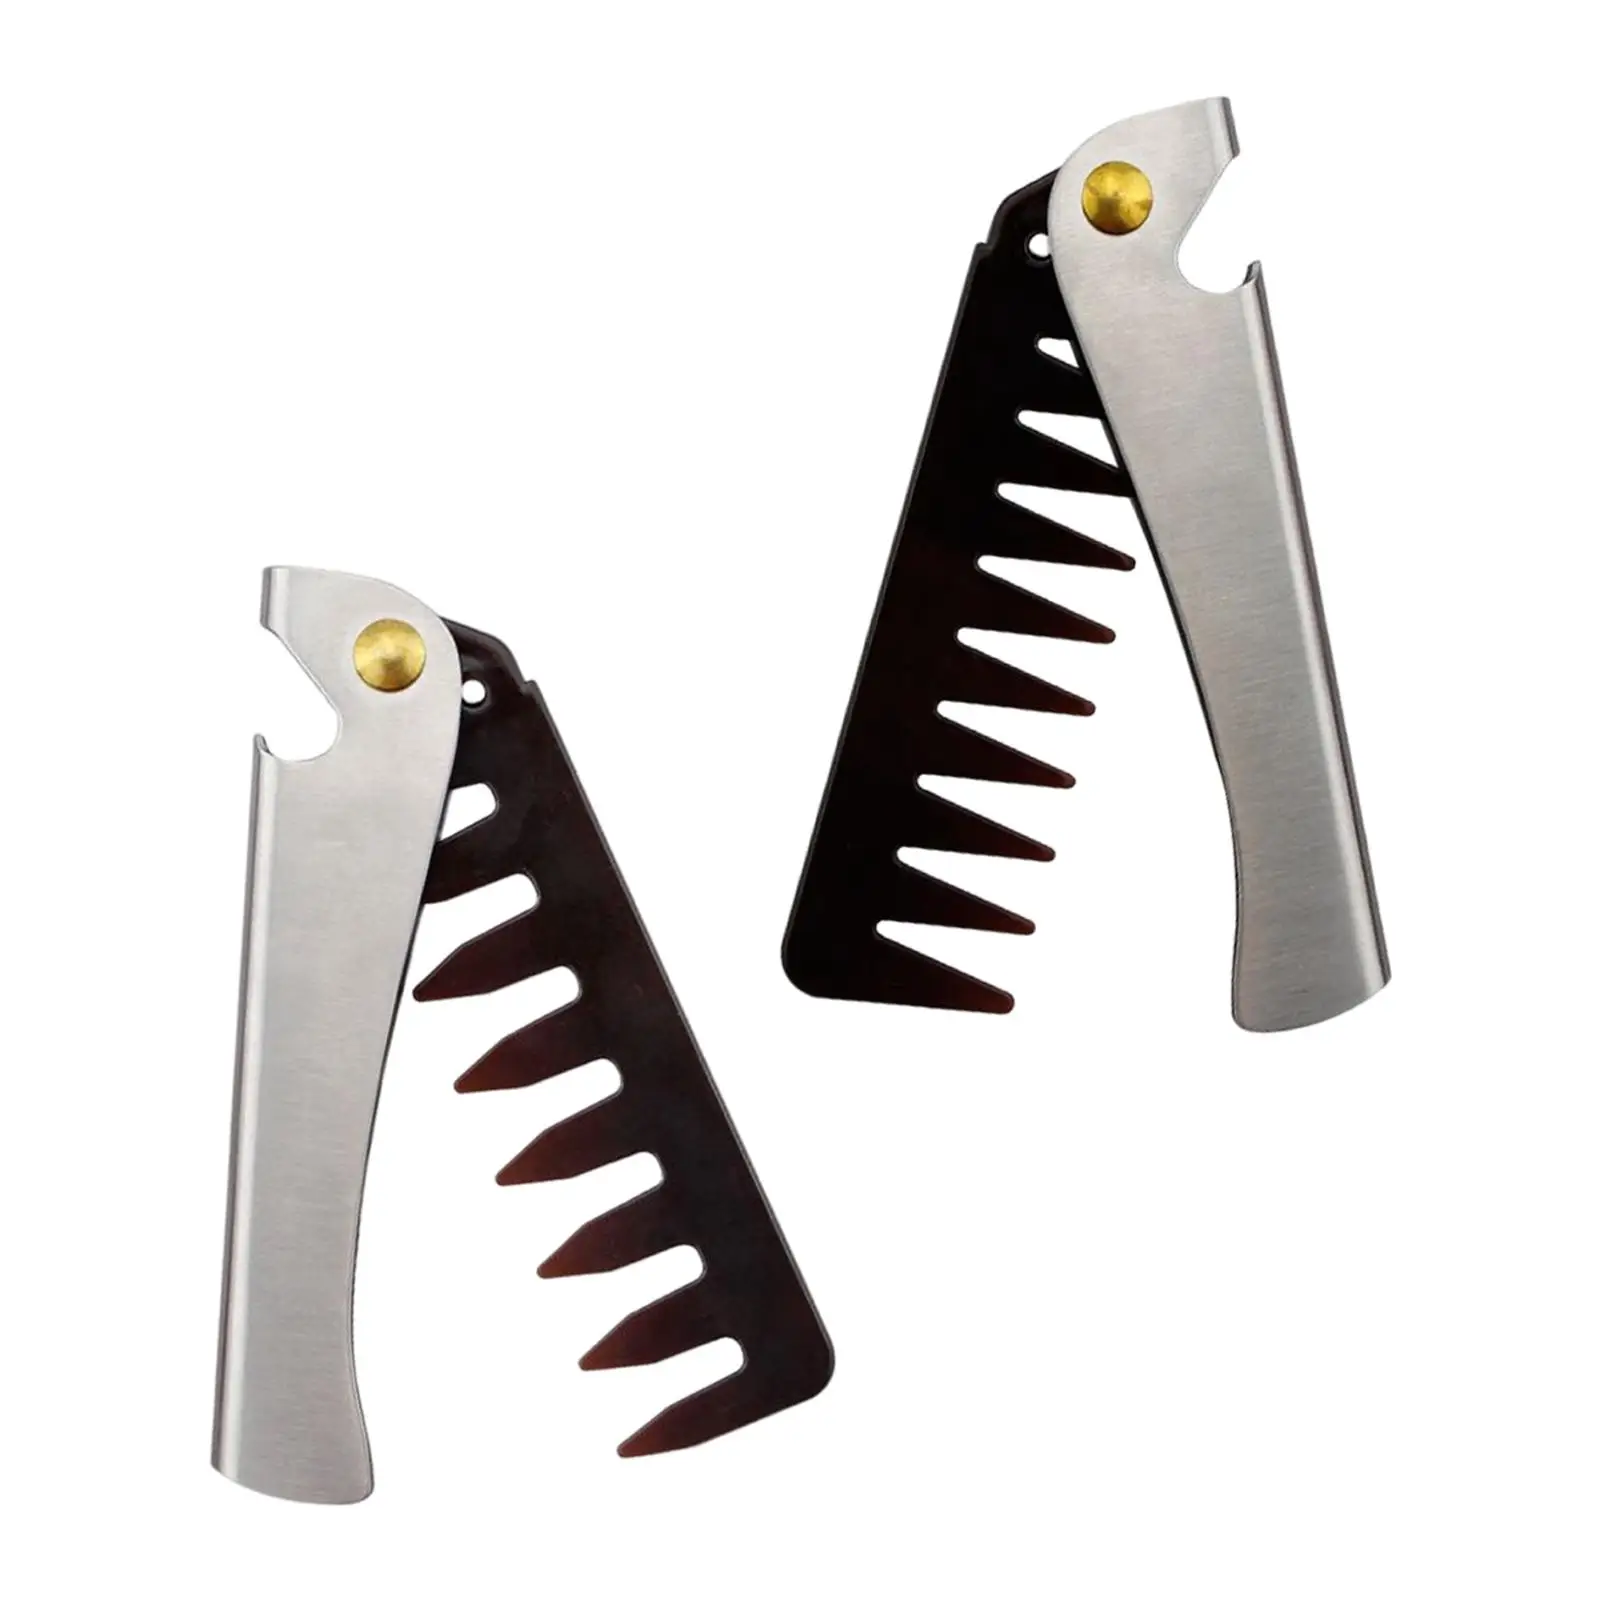 Portable Folding Beard Comb for Men Grooming Styling Hair or Mustache Retro Oil Head Comb for Stylists Beauty Salon Home Use